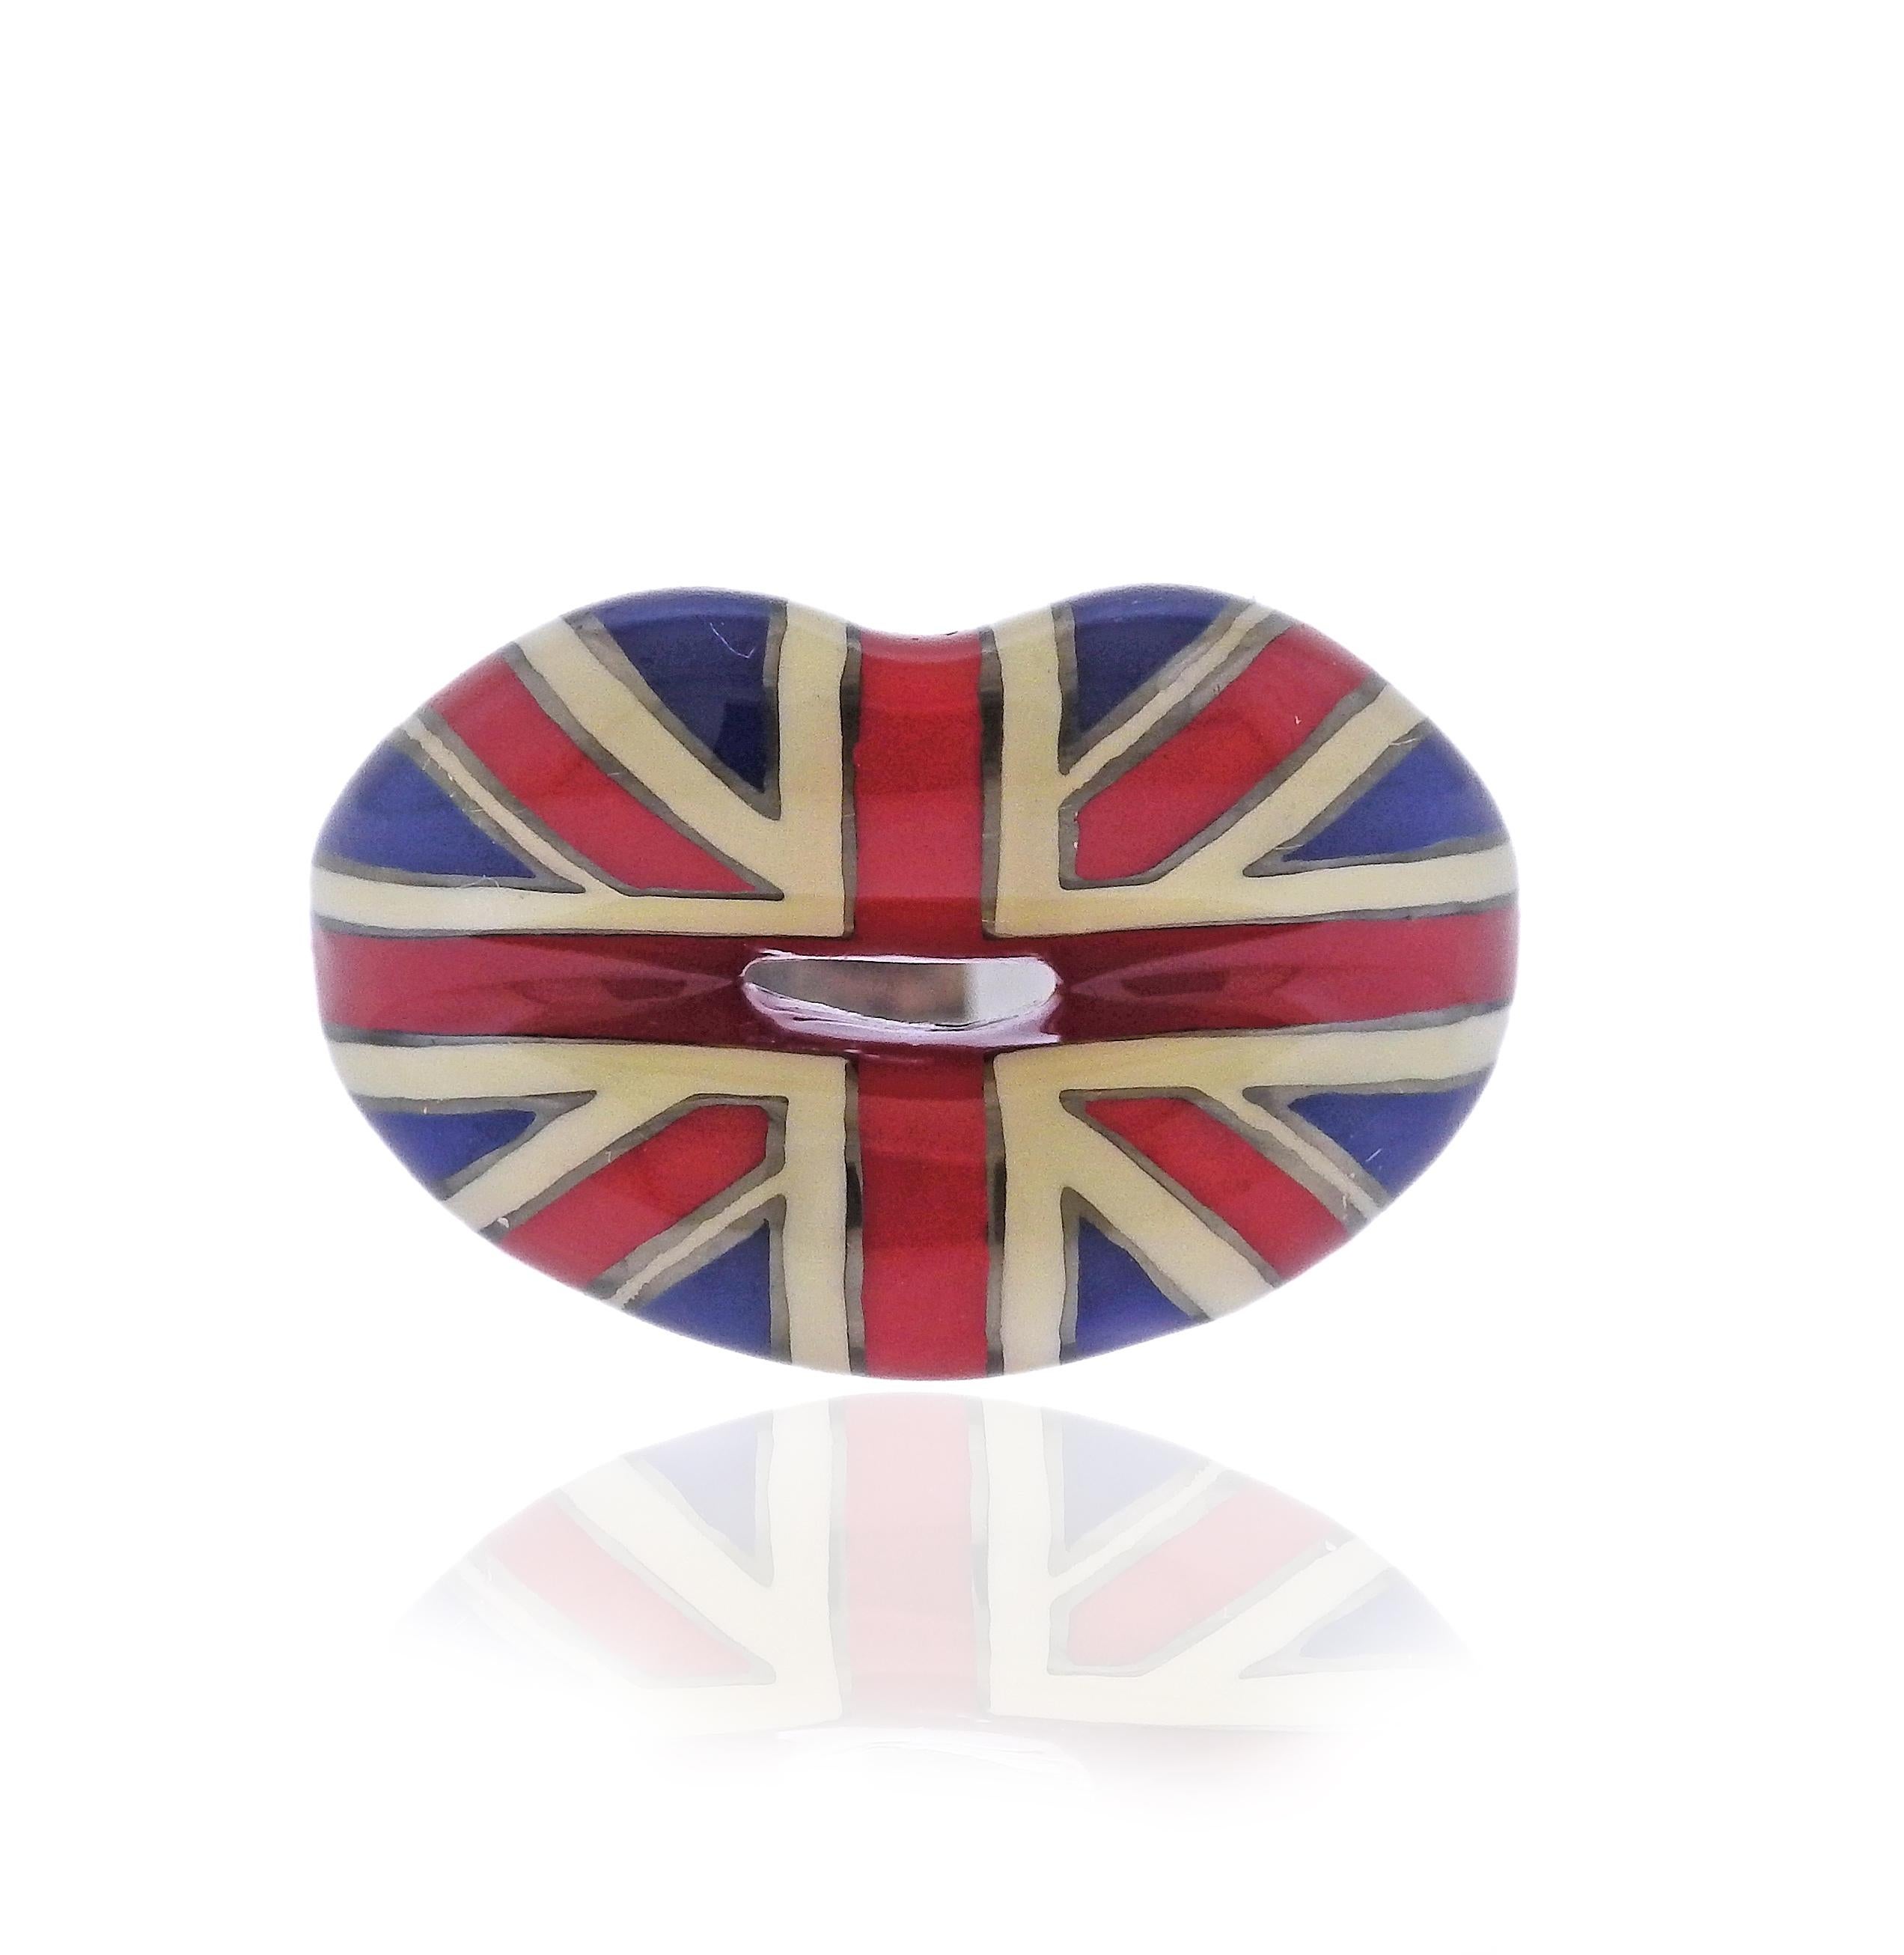 New with tag sterling silver lips ring by Solange Azagury-Partridge, with Union Jack flag enamel. Ring size - 5.5 (EU 50) , top is 16mm wide. Marked 925 and with English maker's marks. Retail $1650. Weight - 10.8 grams.